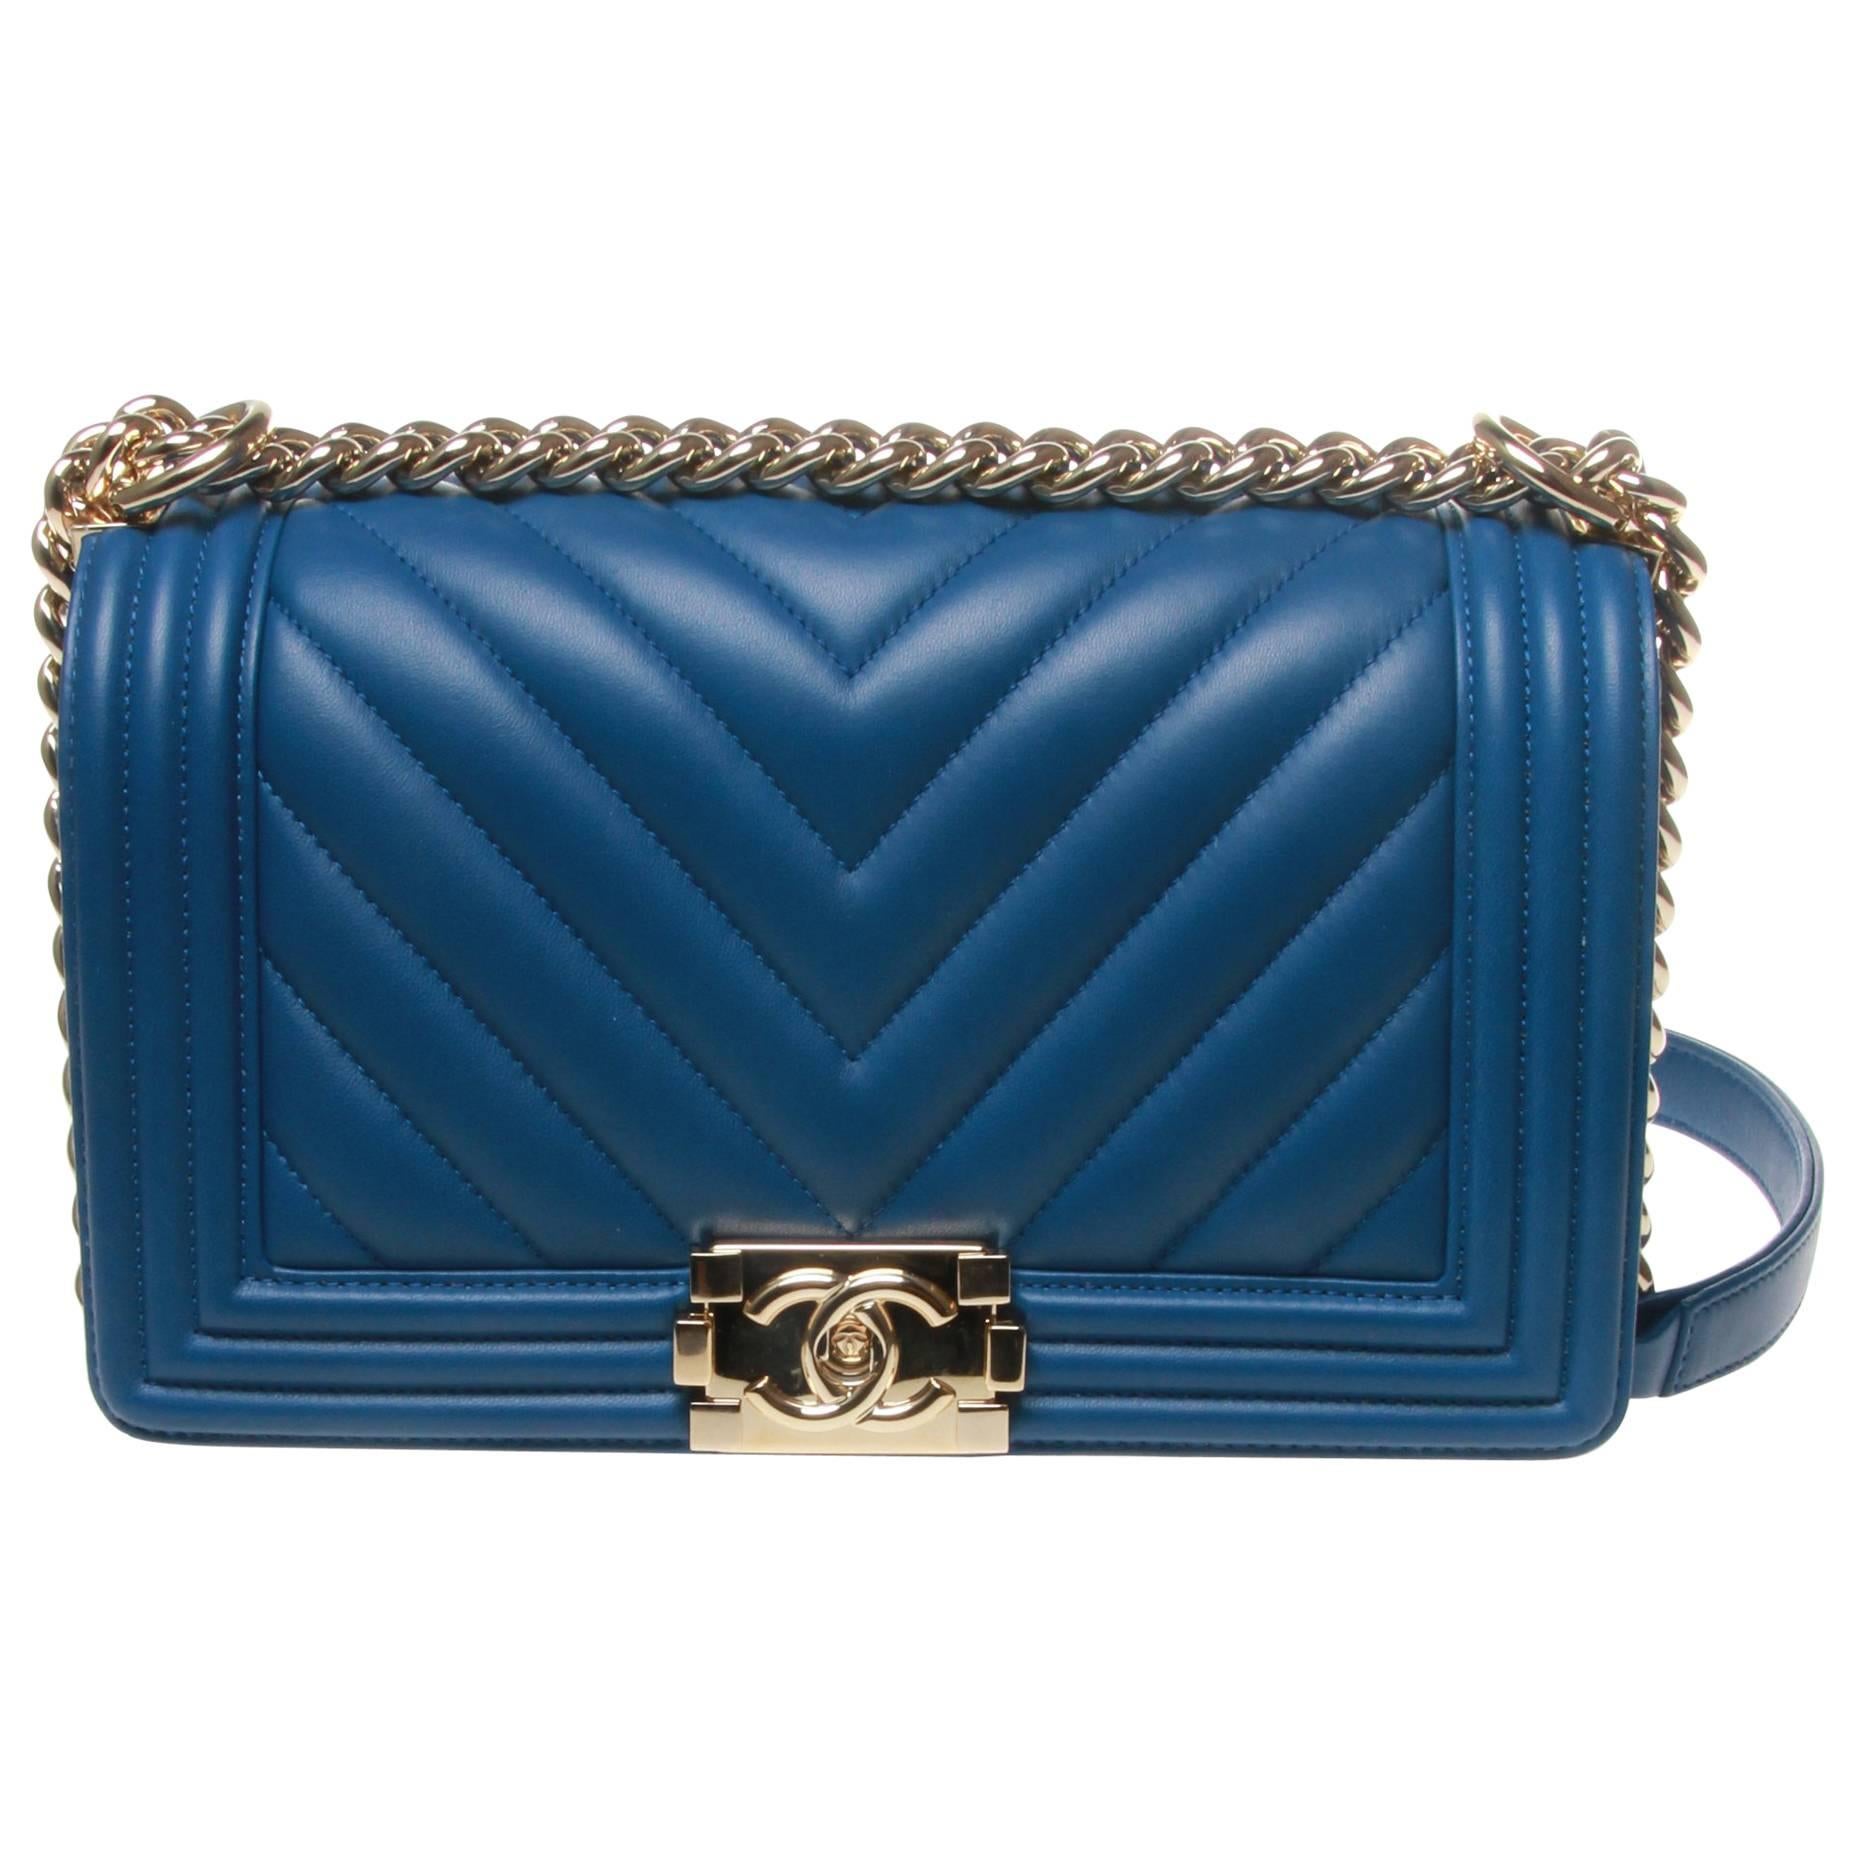 Chanel boy cobalt blue with silver hardware